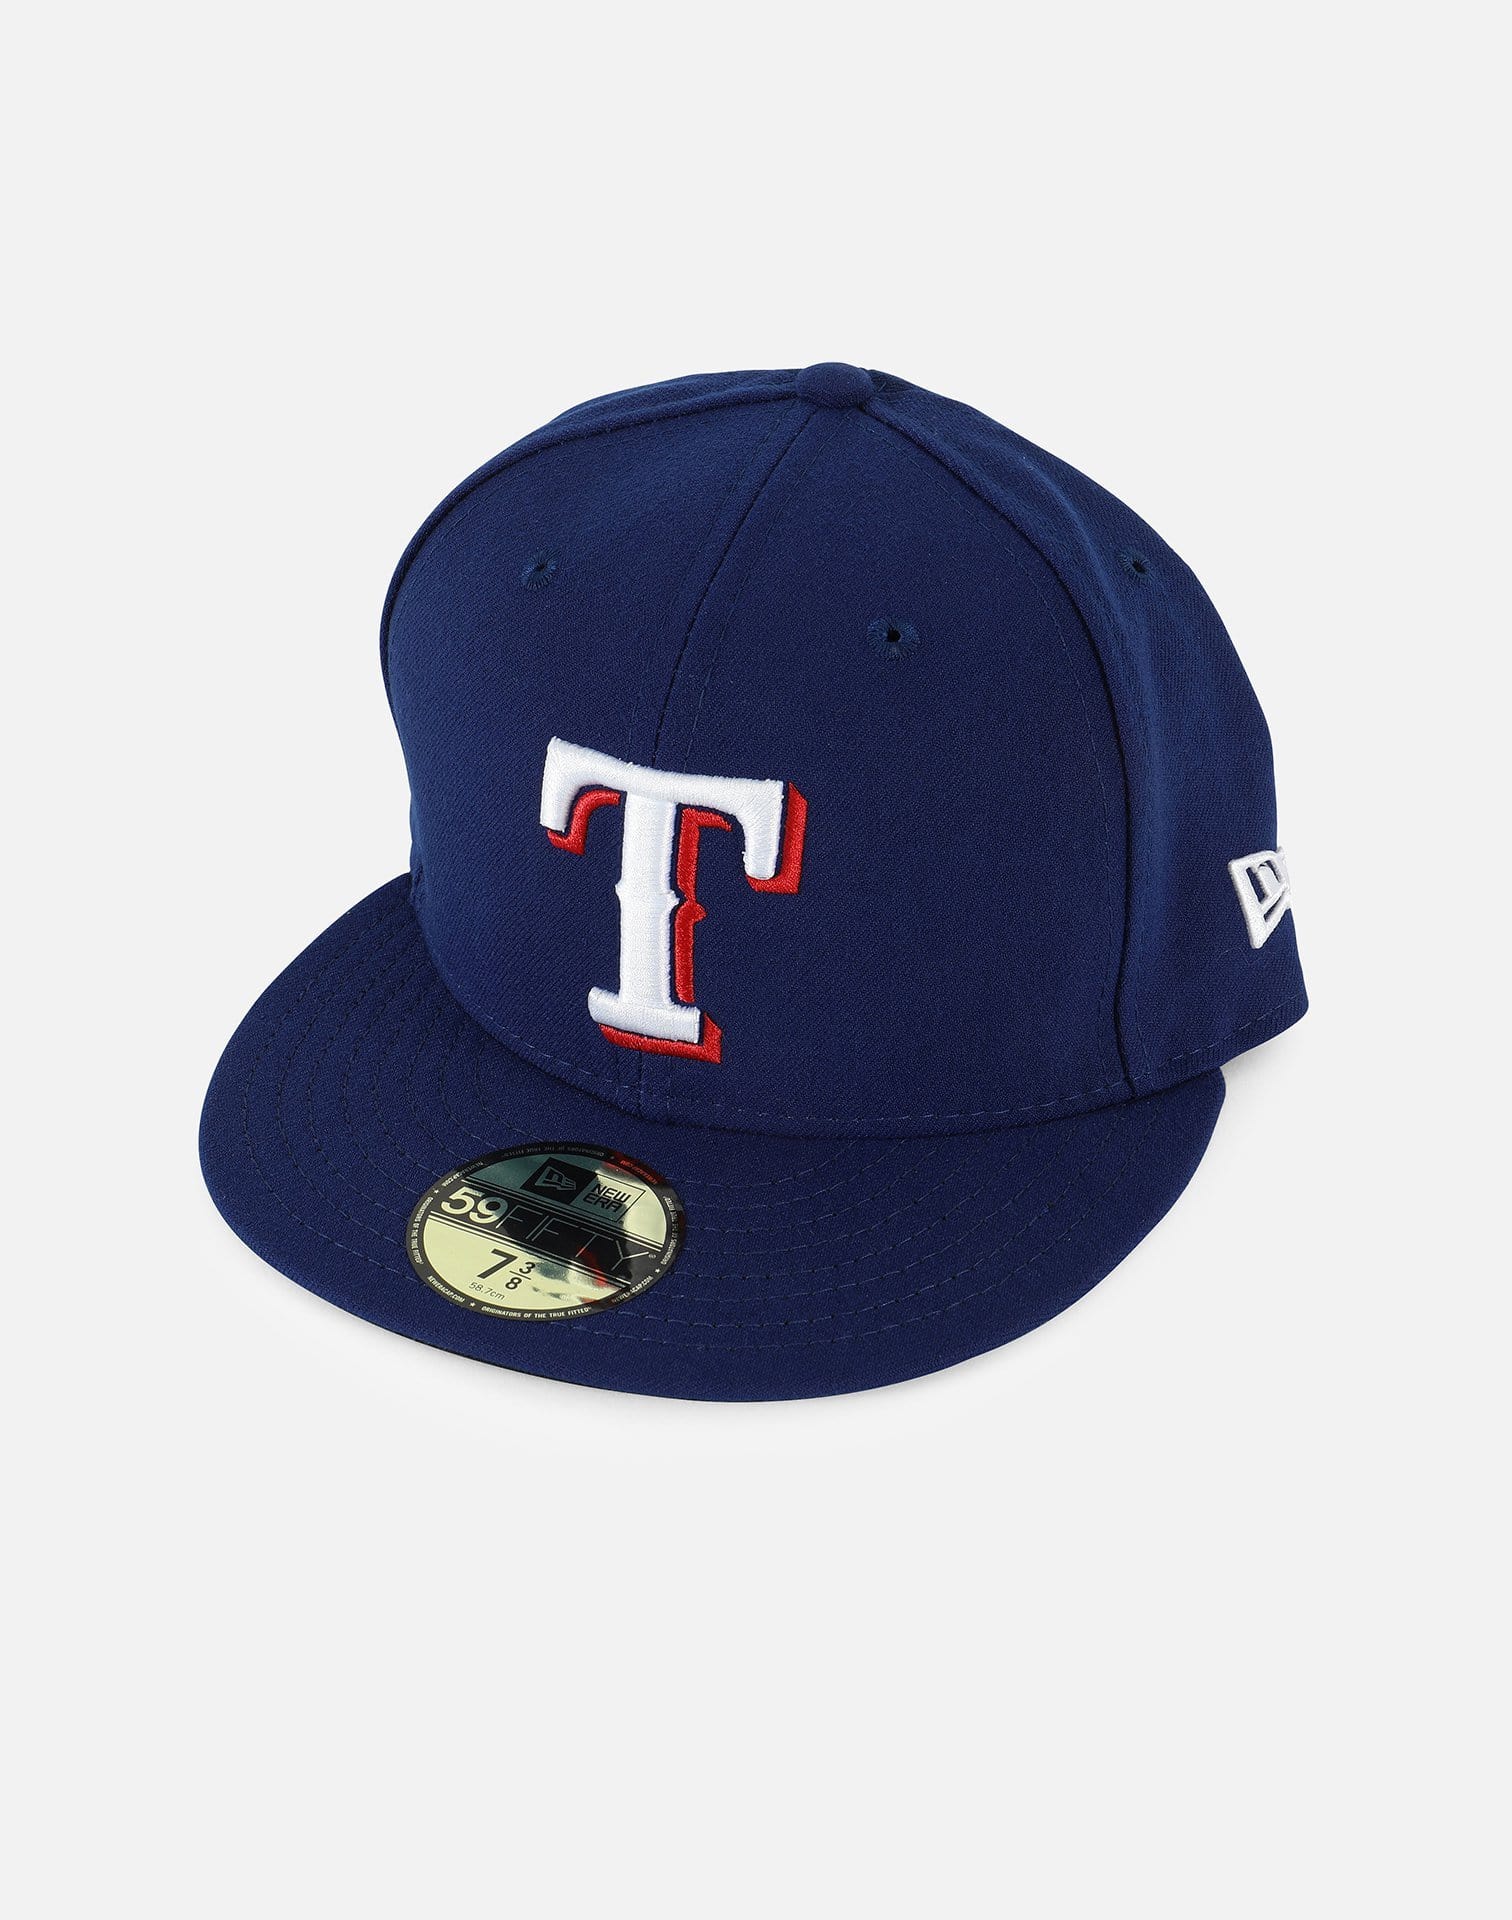 New Era Texas Rangers Fitted Hat